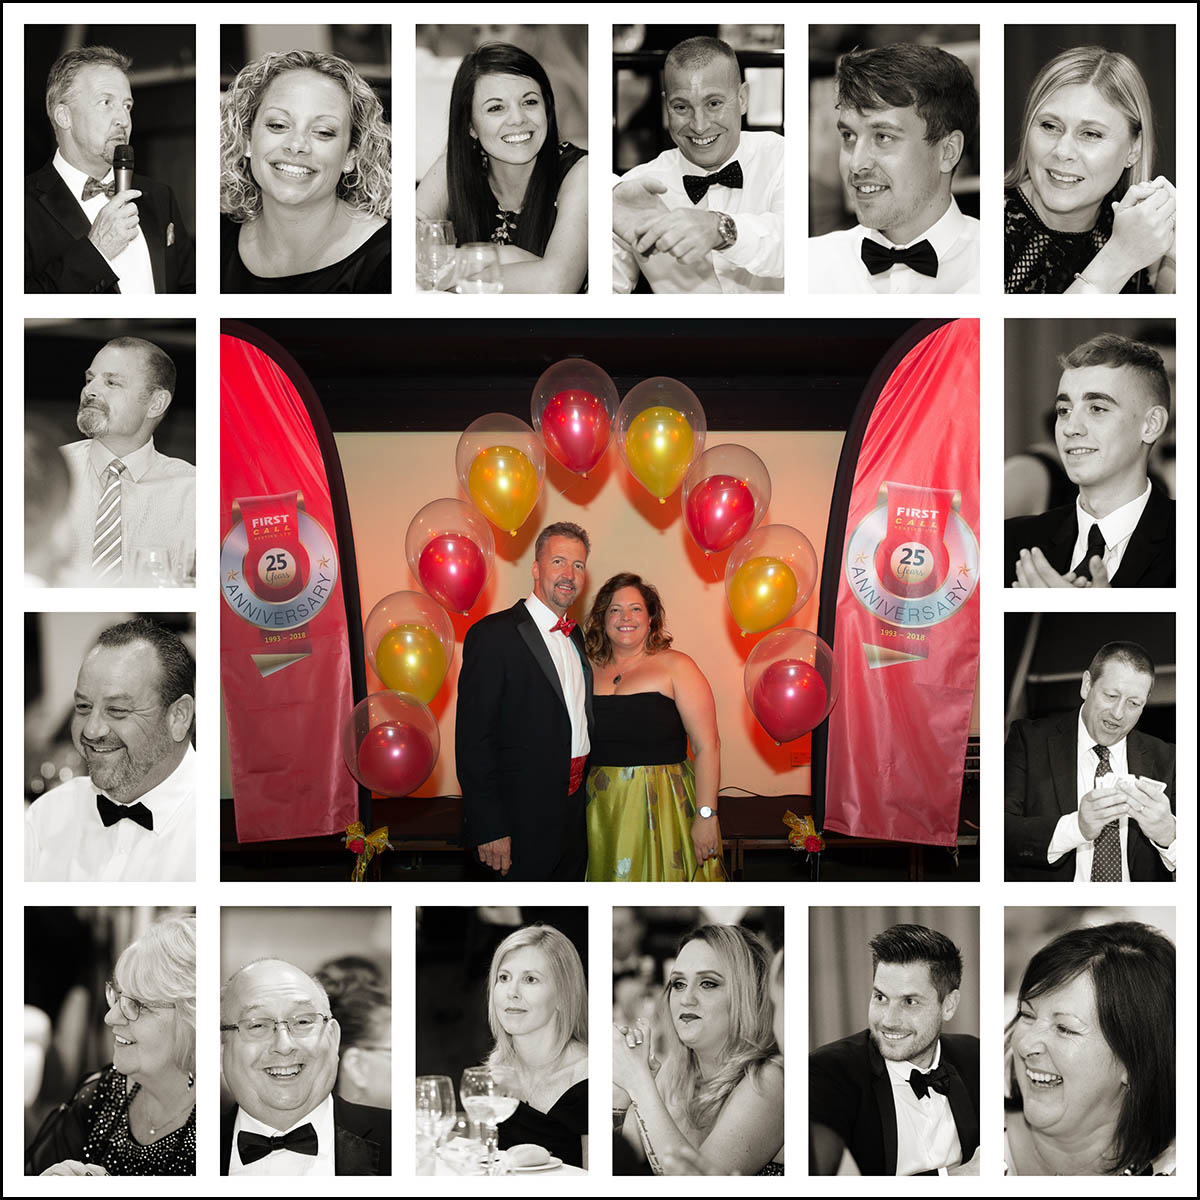 Party photographers Southampton for First Call Heating 25 year Anniversary celebrations